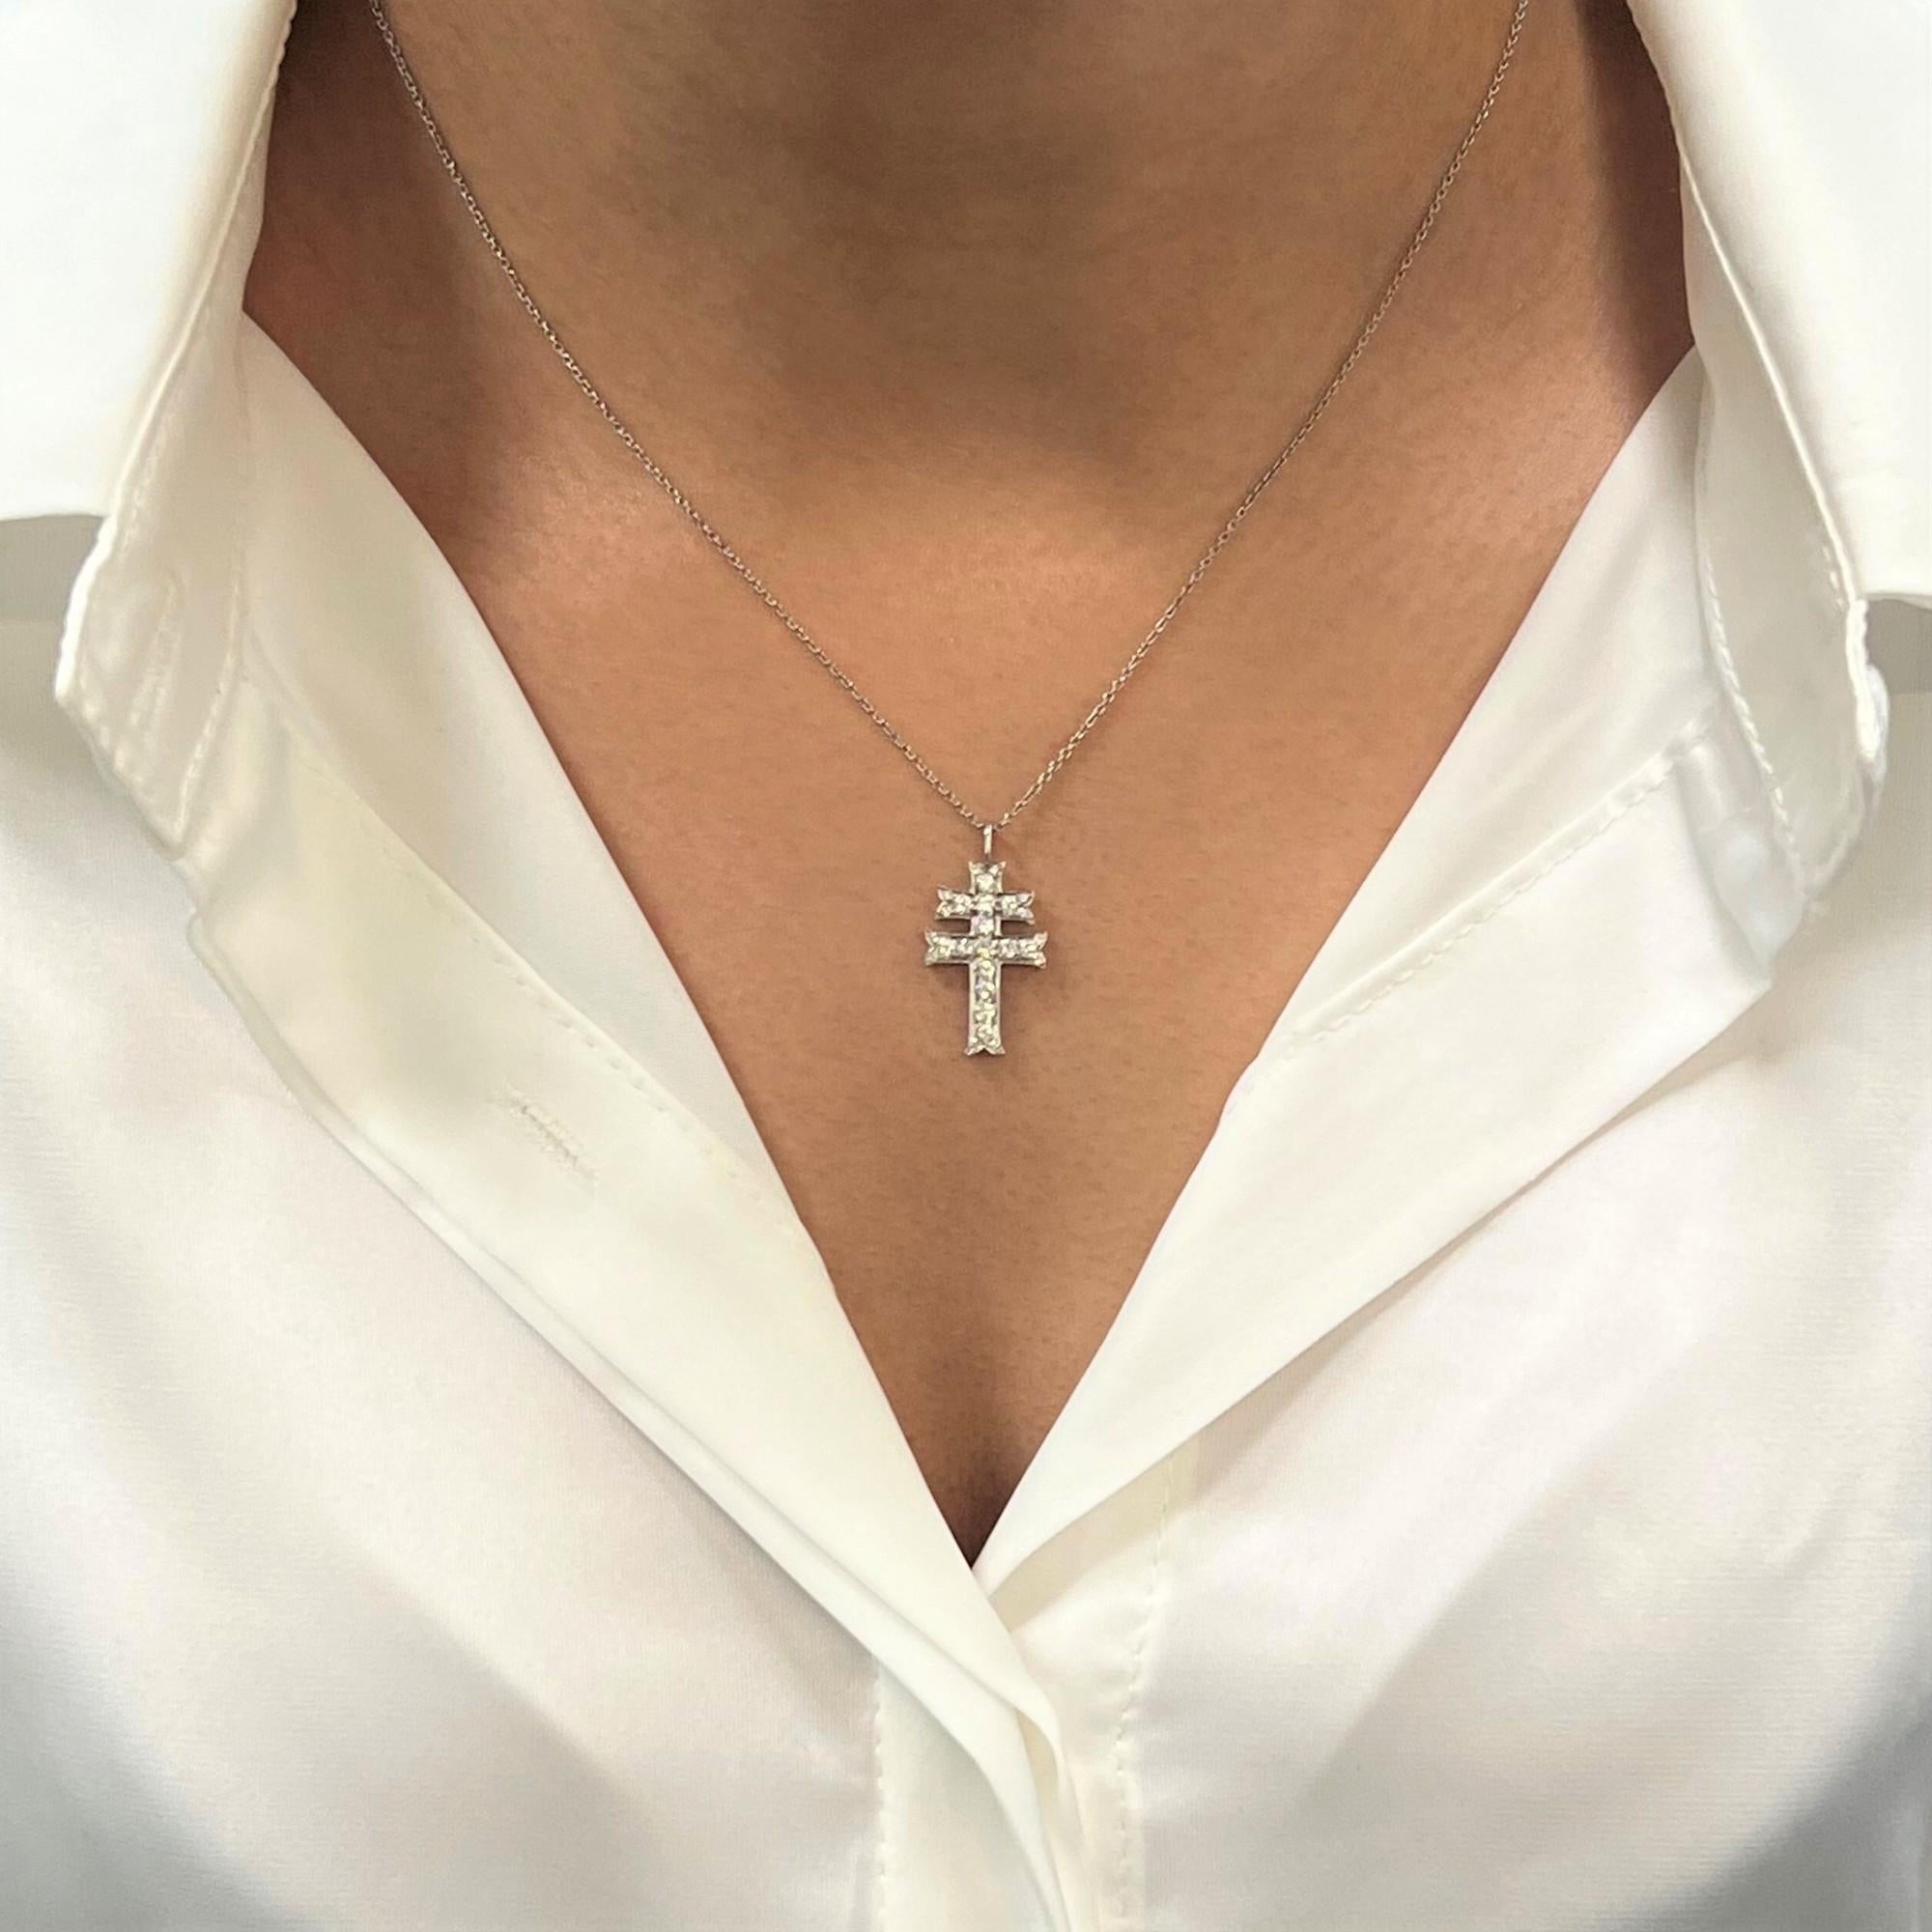 Rachel Koen Diamond Cross Pendant Necklace Platinum 0.33Cttw 16 inches In New Condition For Sale In New York, NY